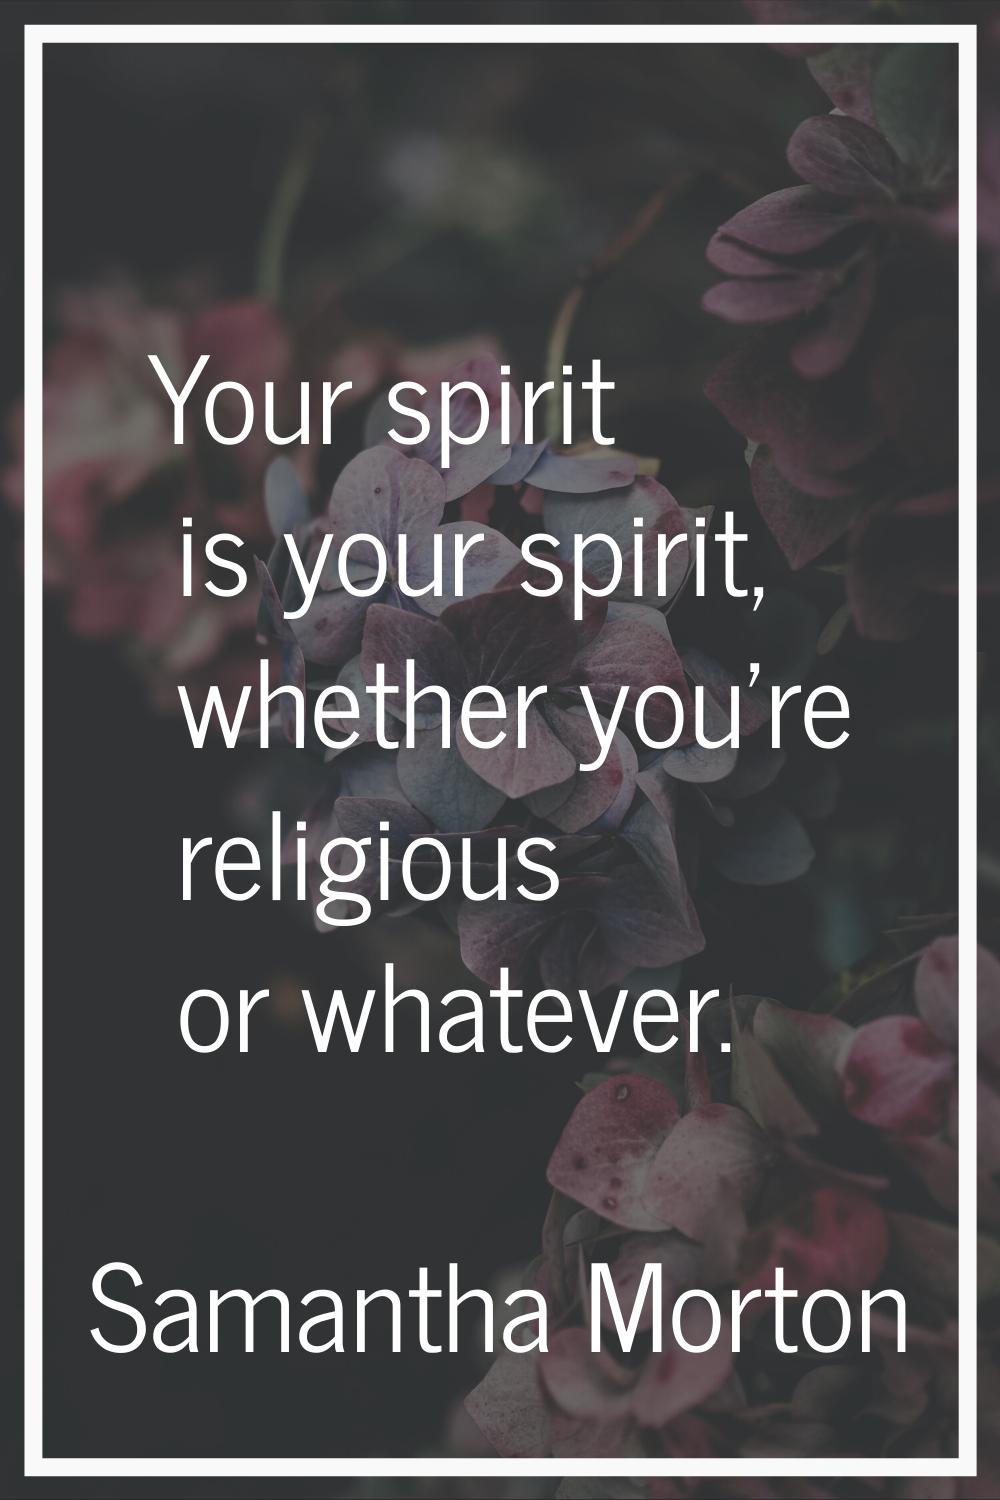 Your spirit is your spirit, whether you're religious or whatever.